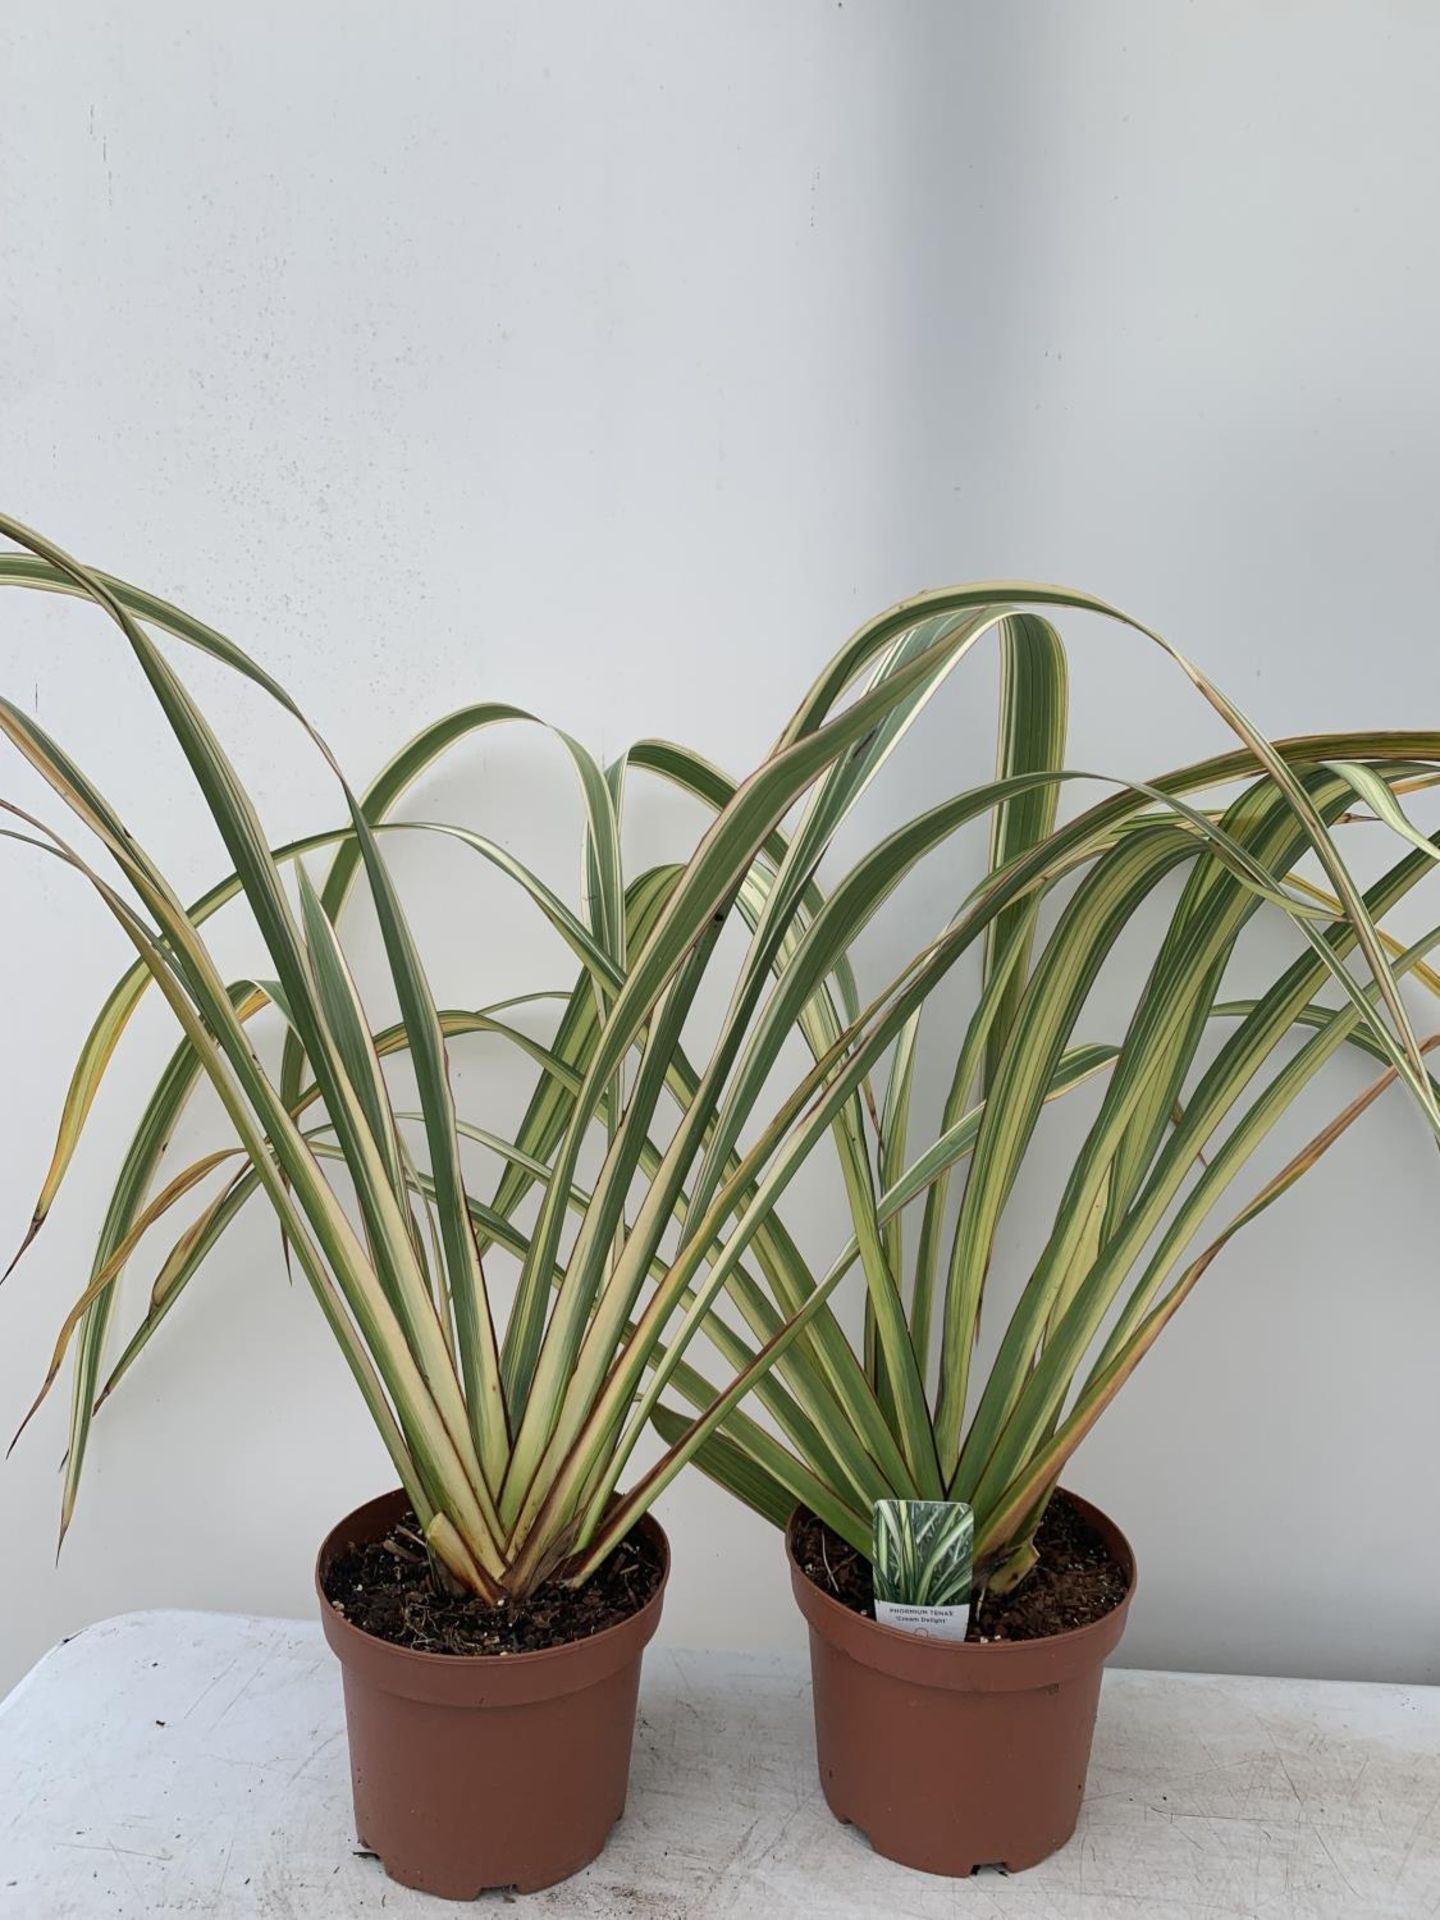 TWO GREEN PHORMIUM TENAX 'CREAM DELIGHT' APPROX 70CM IN HEIGHT IN 3 LTR POTS PLUS VAT TO BE SOLD FOR - Image 4 of 5